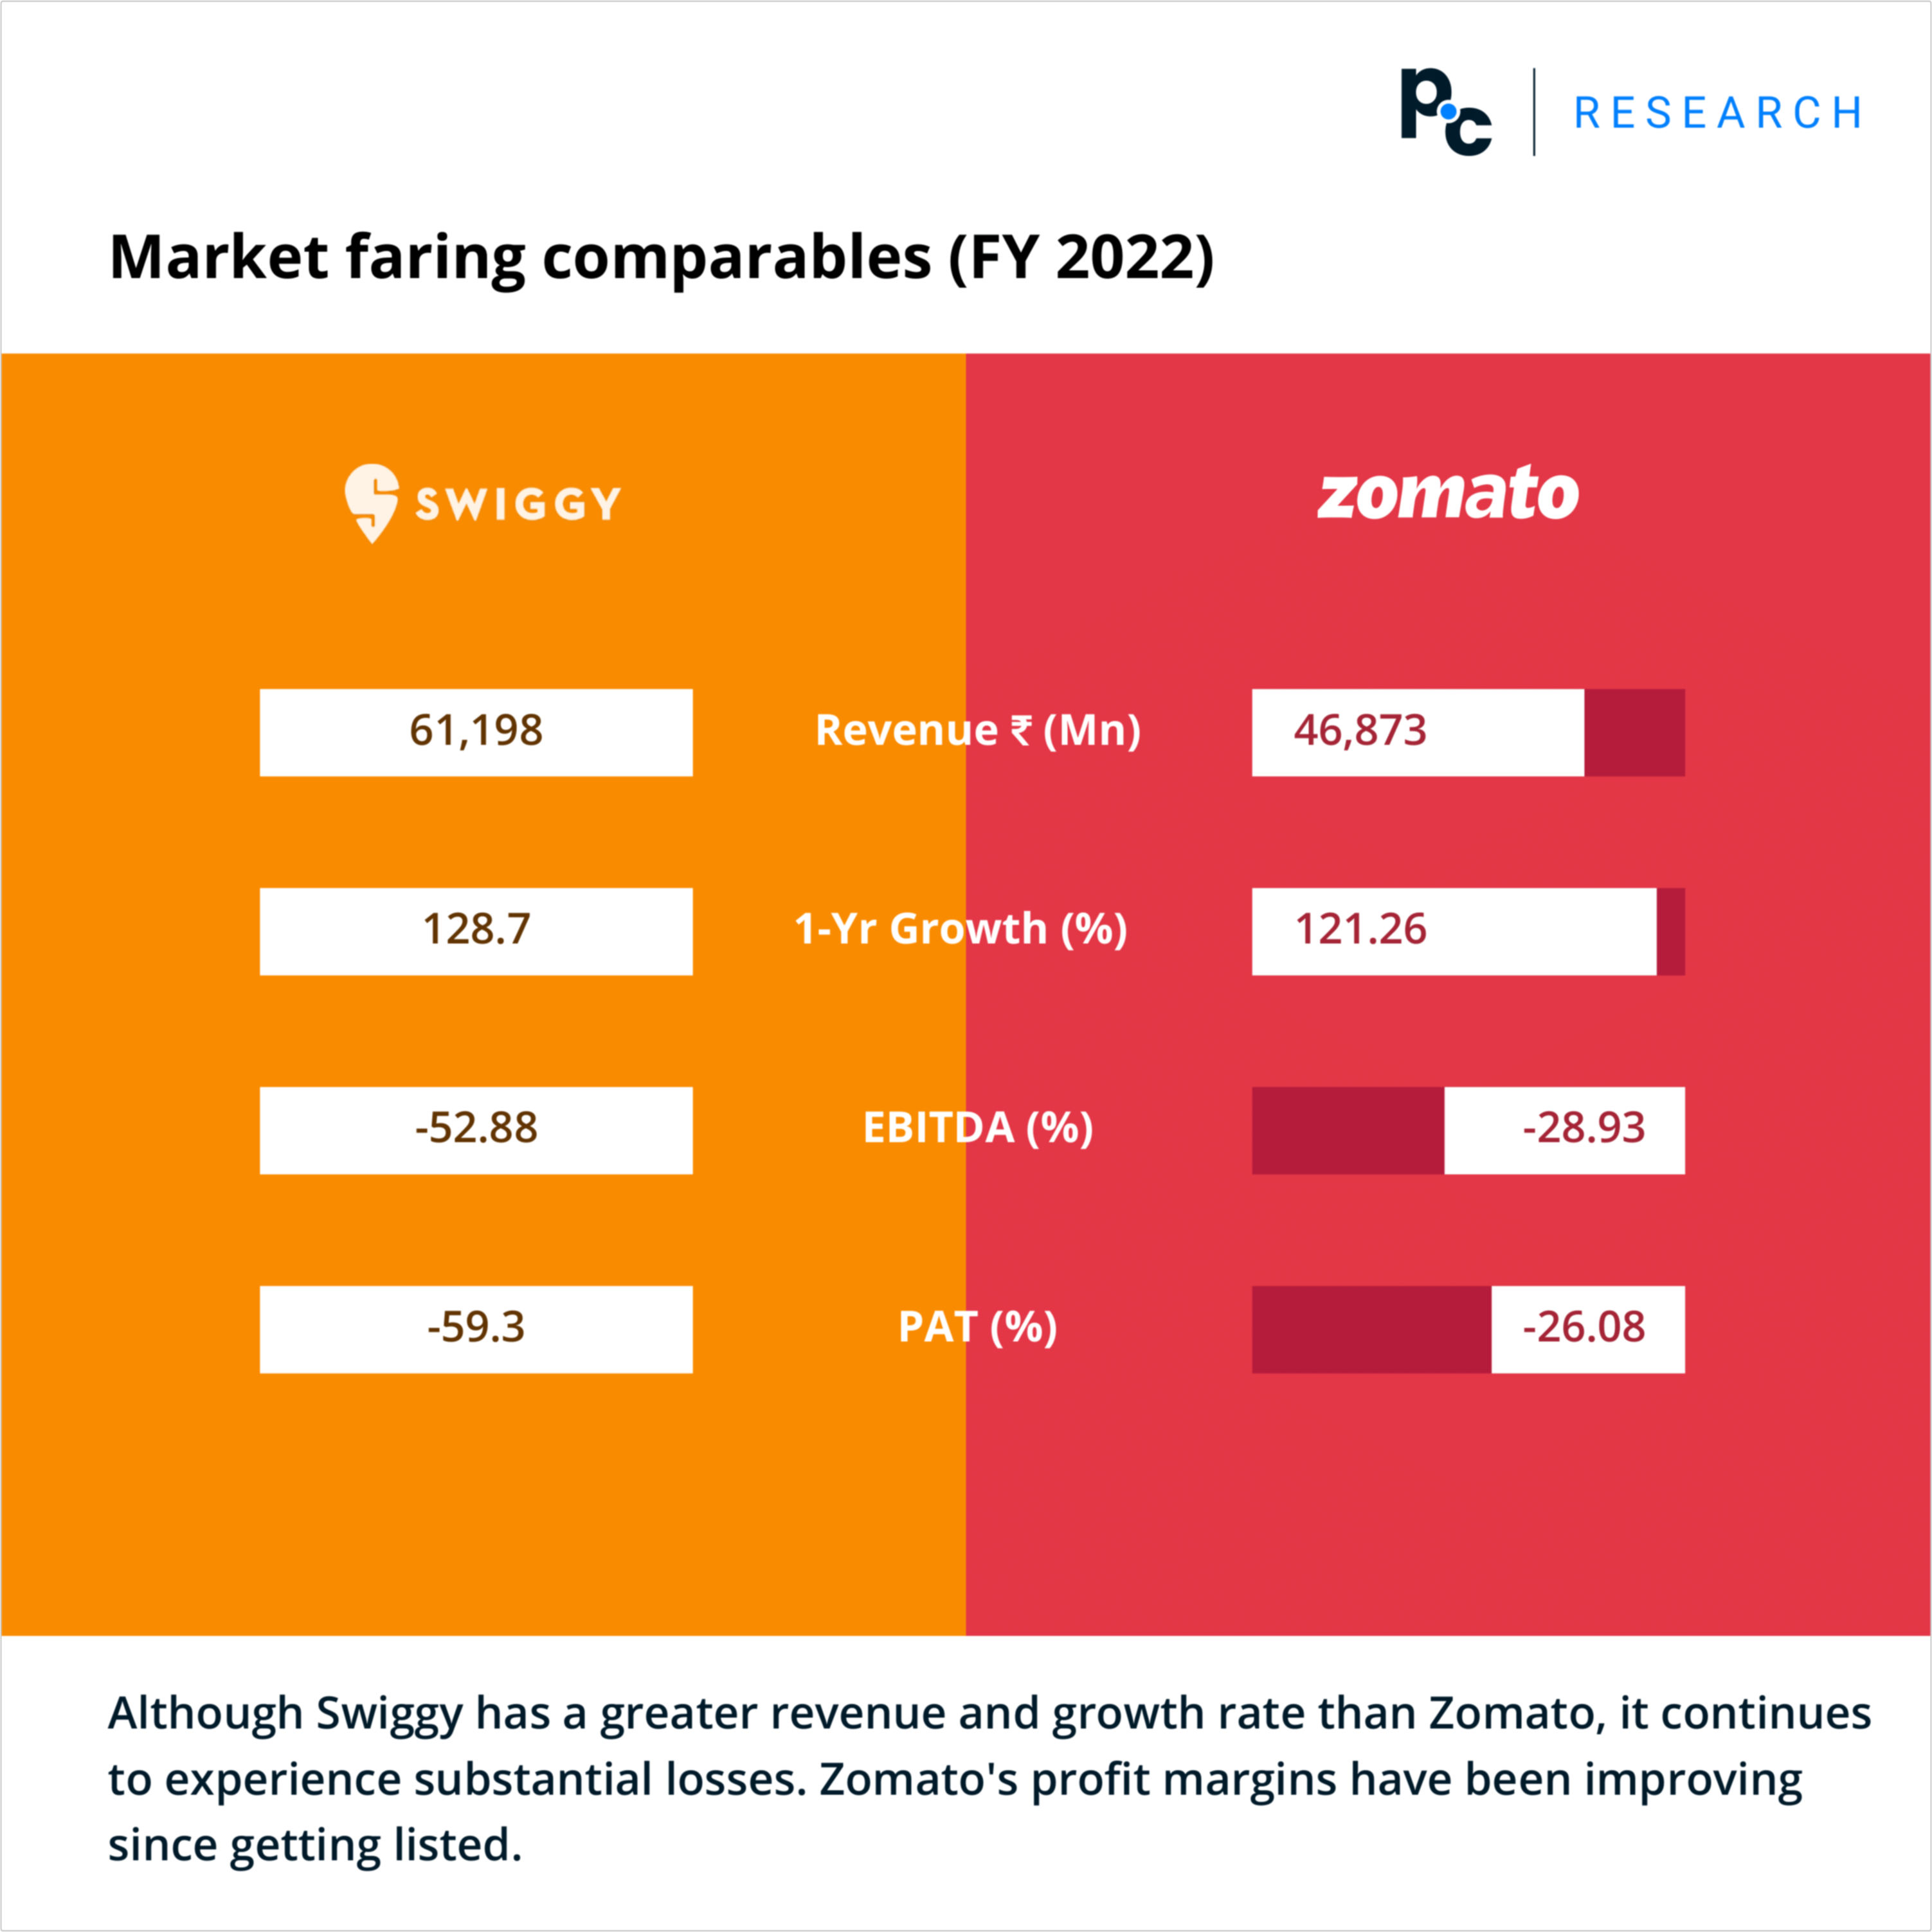 Comparable Company Analysis of Swiggy and Zomato
